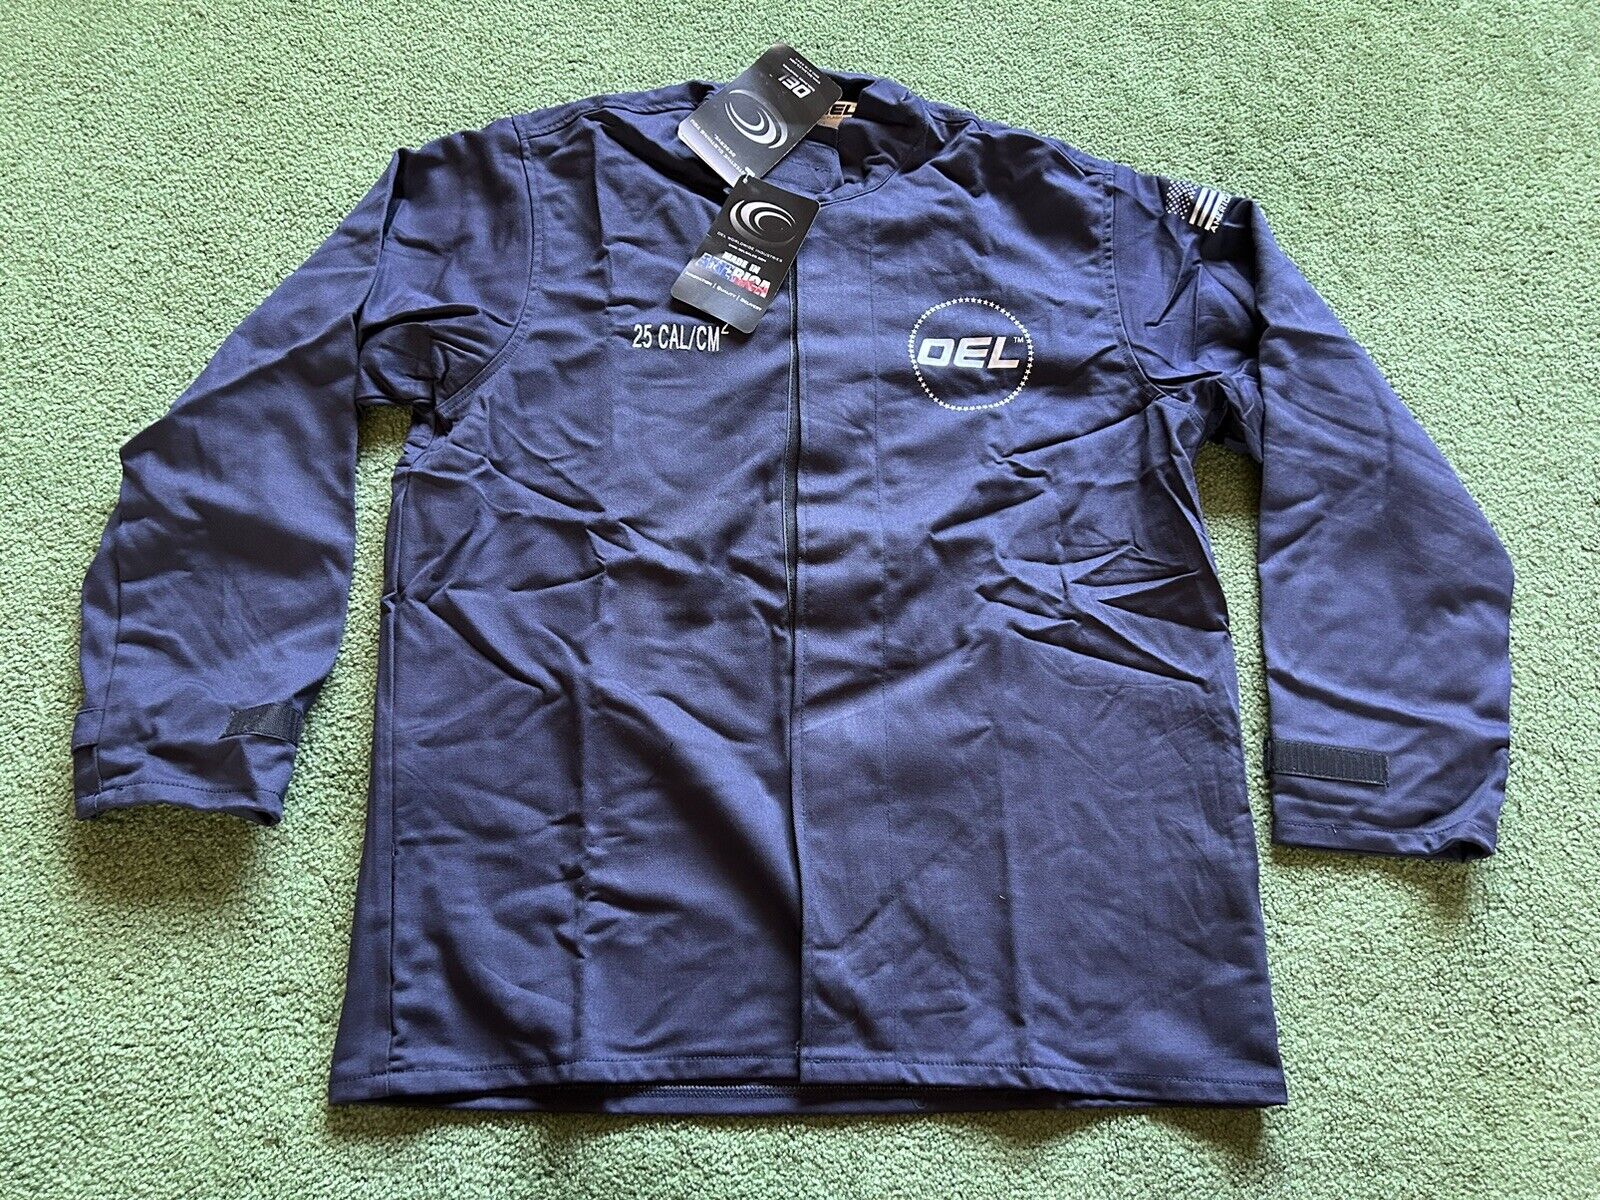 Oberon Electric OEL Arc Flash Jacket / Overalls / Cover 25 Cal Cm^2 Size L New